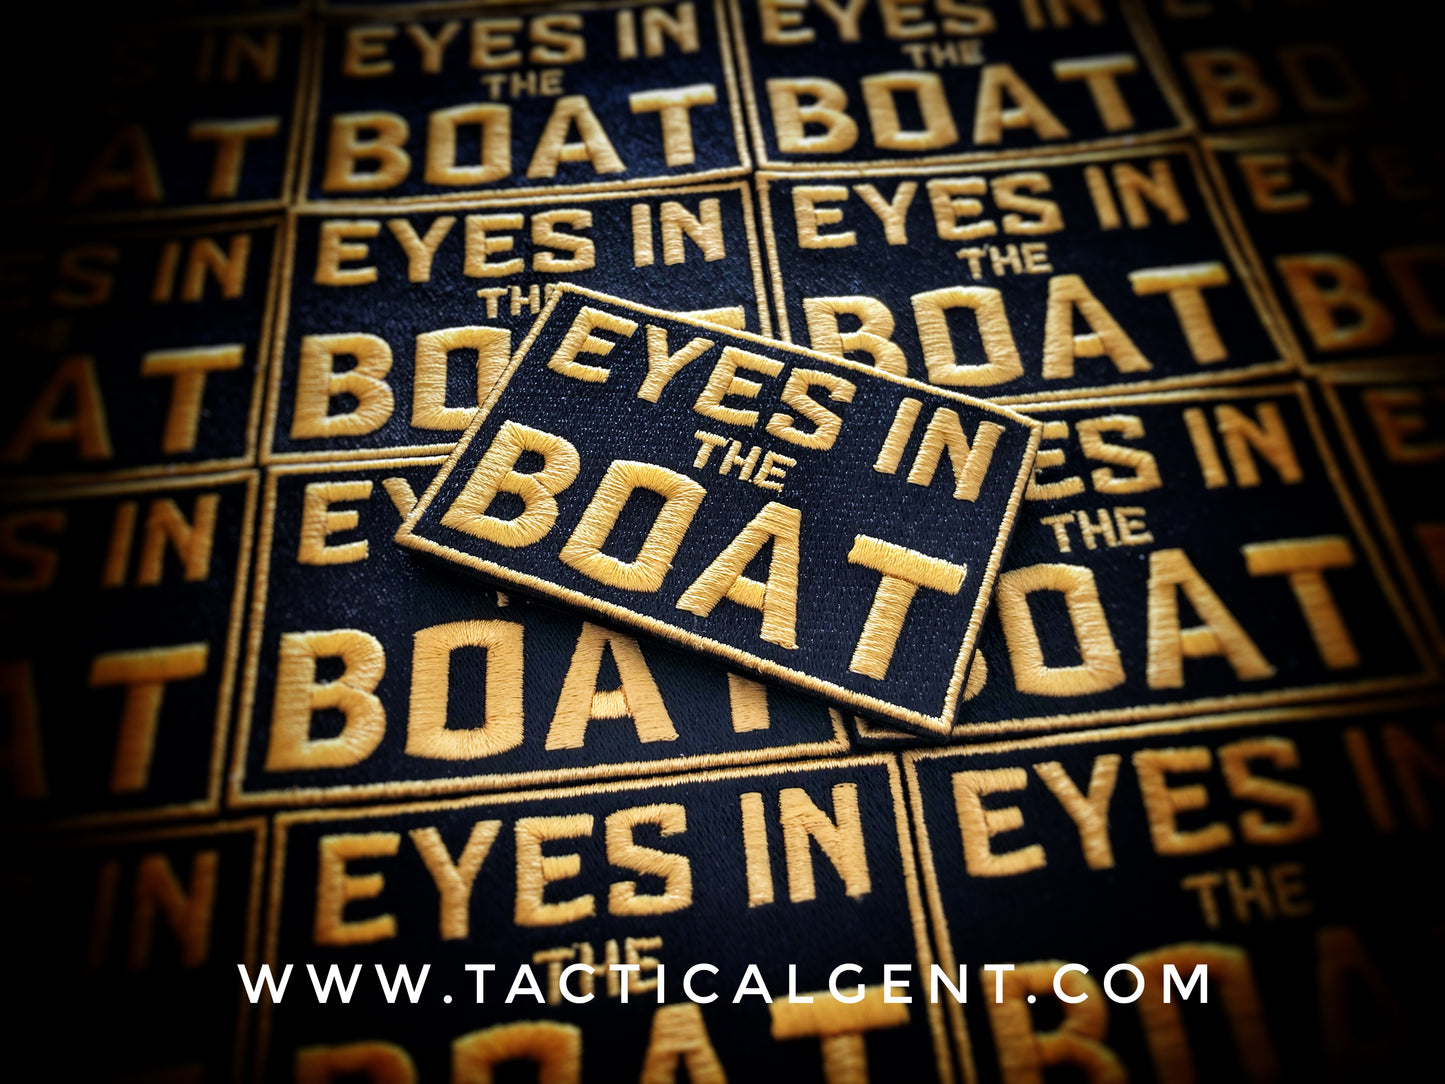 EYES IN THE BOAT Patch